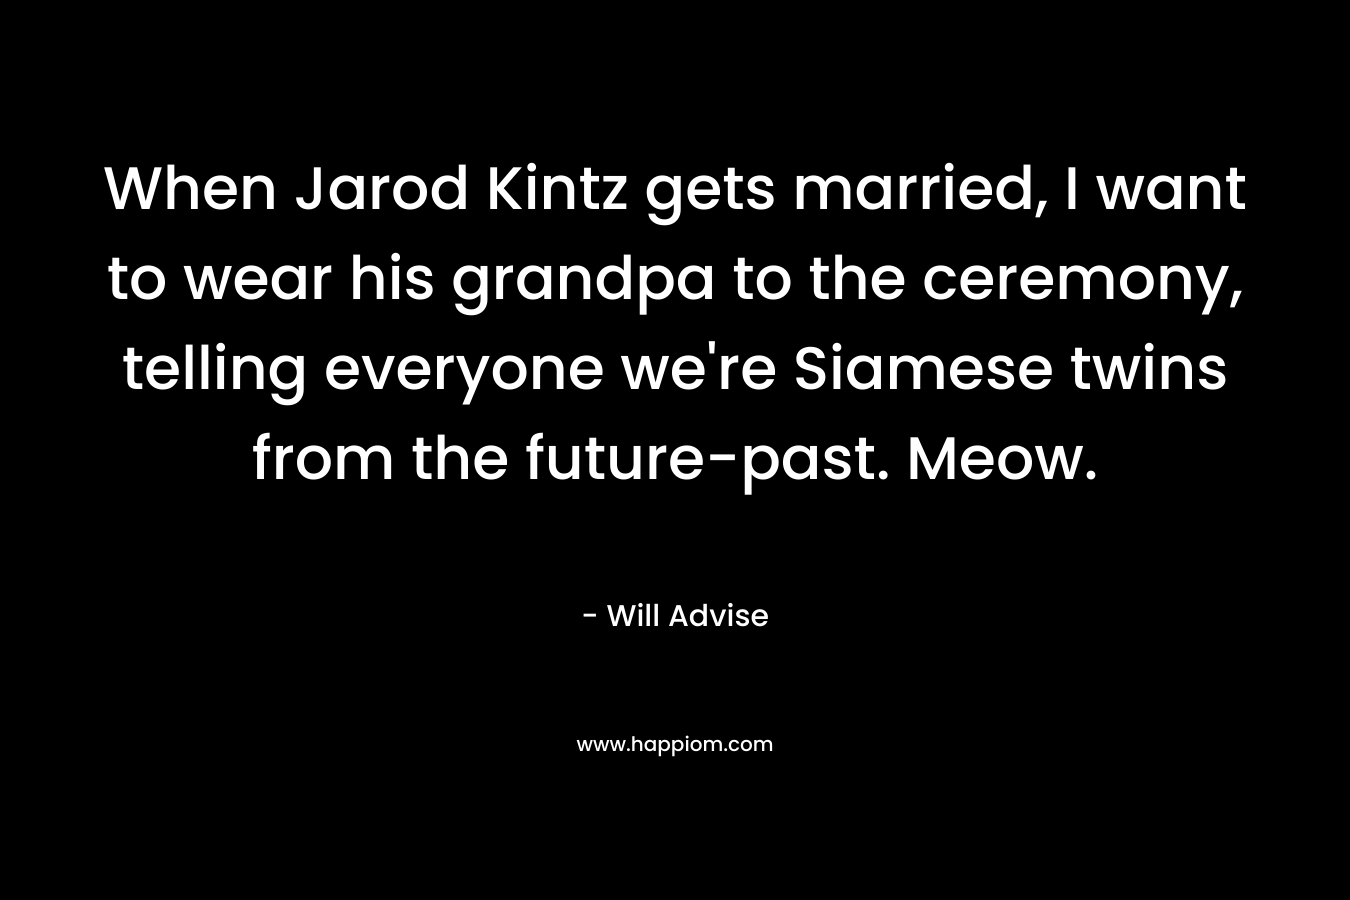 When Jarod Kintz gets married, I want to wear his grandpa to the ceremony, telling everyone we’re Siamese twins from the future-past. Meow. – Will Advise